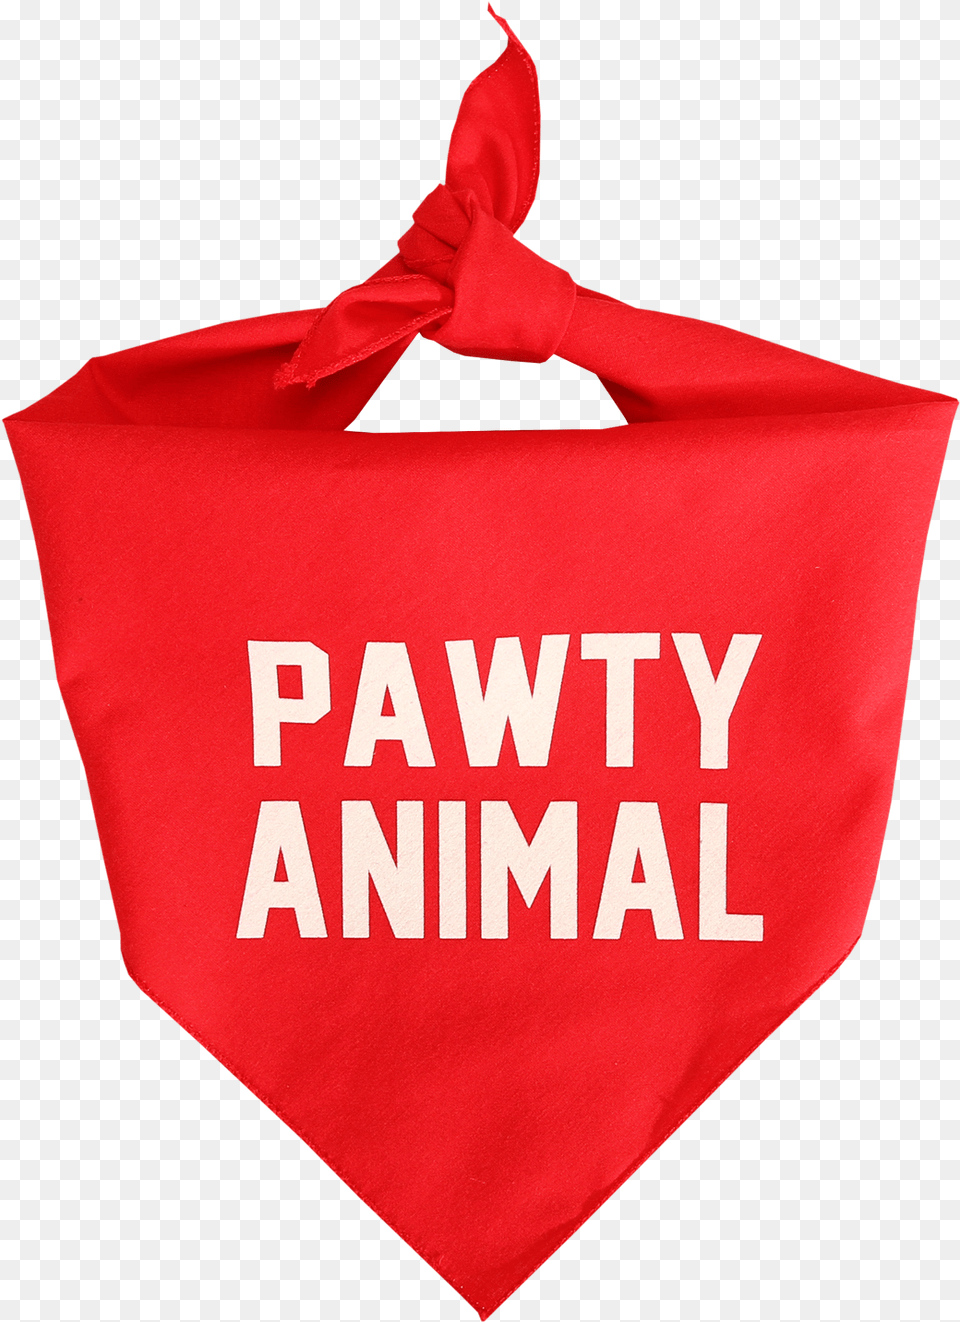 Pets Frenchie Pawty Animals Red Bandana Illustration, Accessories, Formal Wear, Tie, Headband Free Png Download